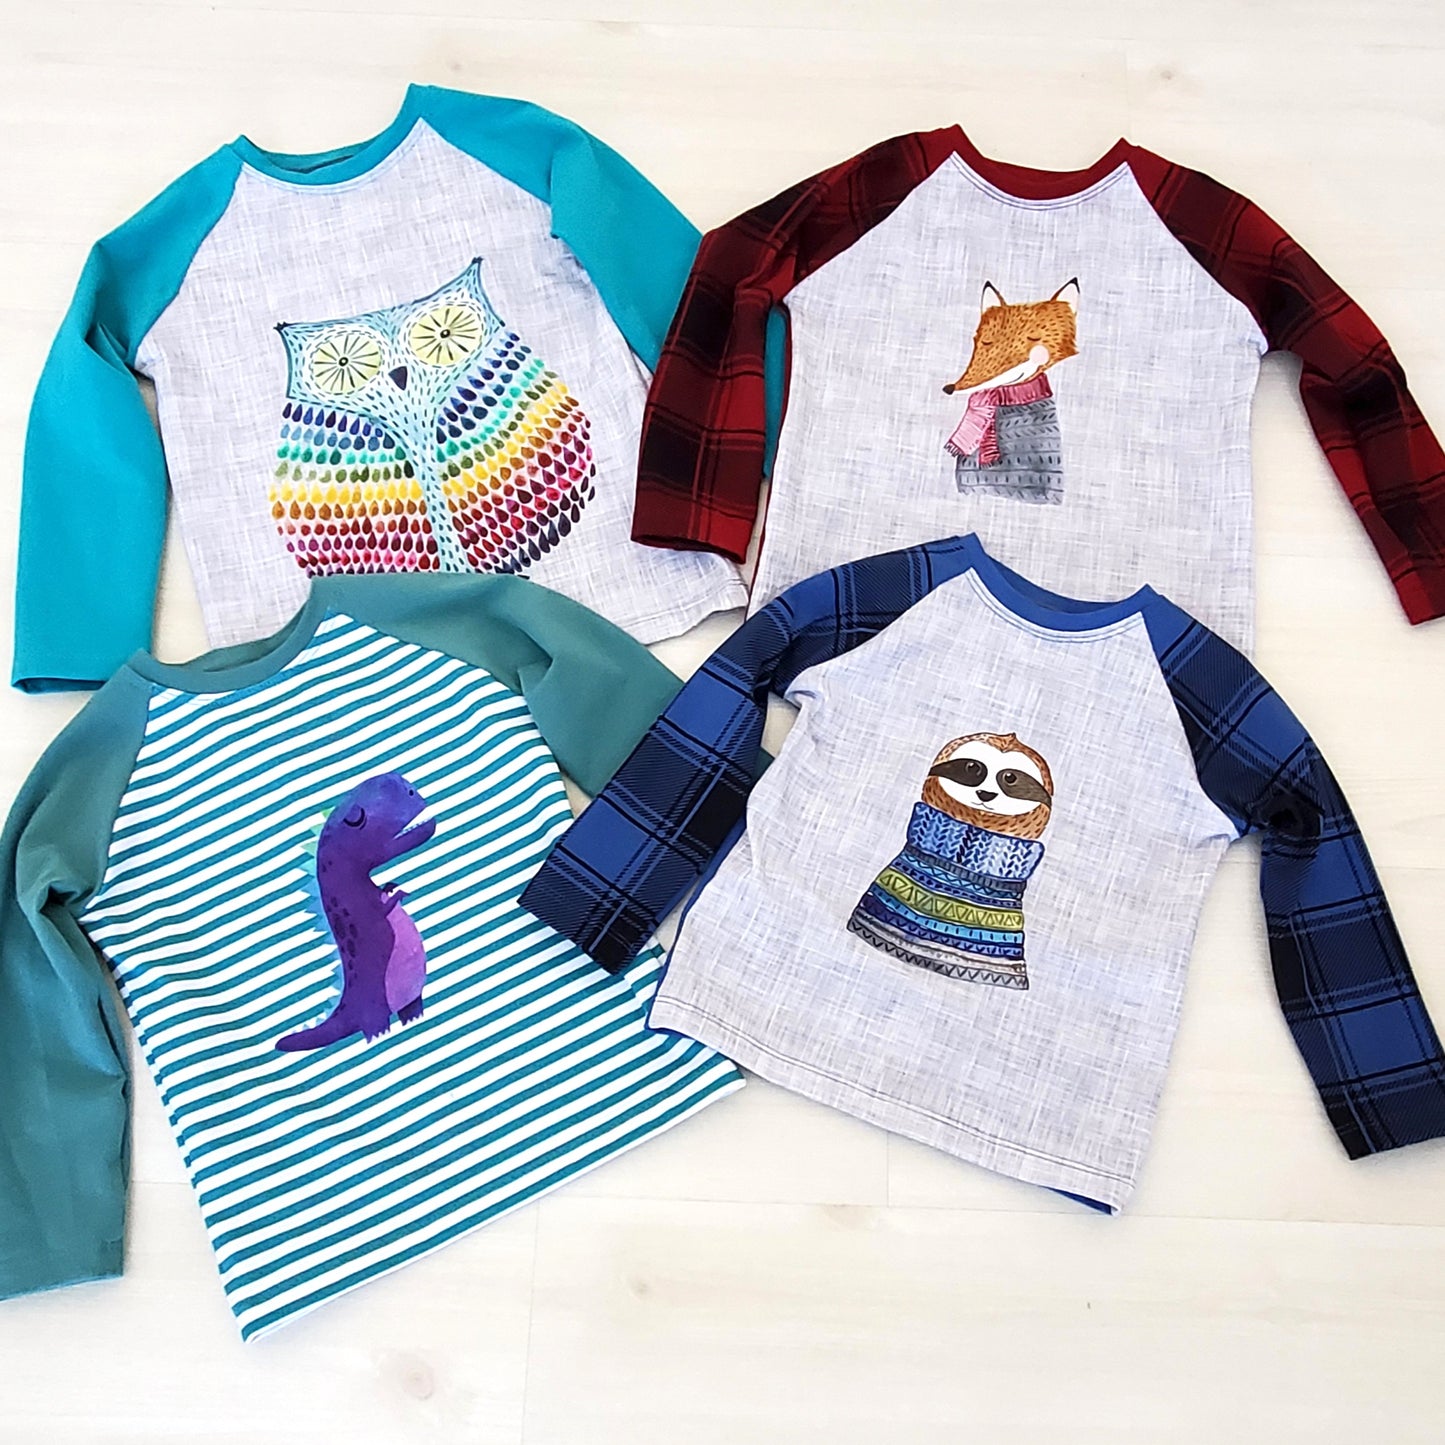 Animal Long-Sleeved Tee for Kids in Organic Cotton